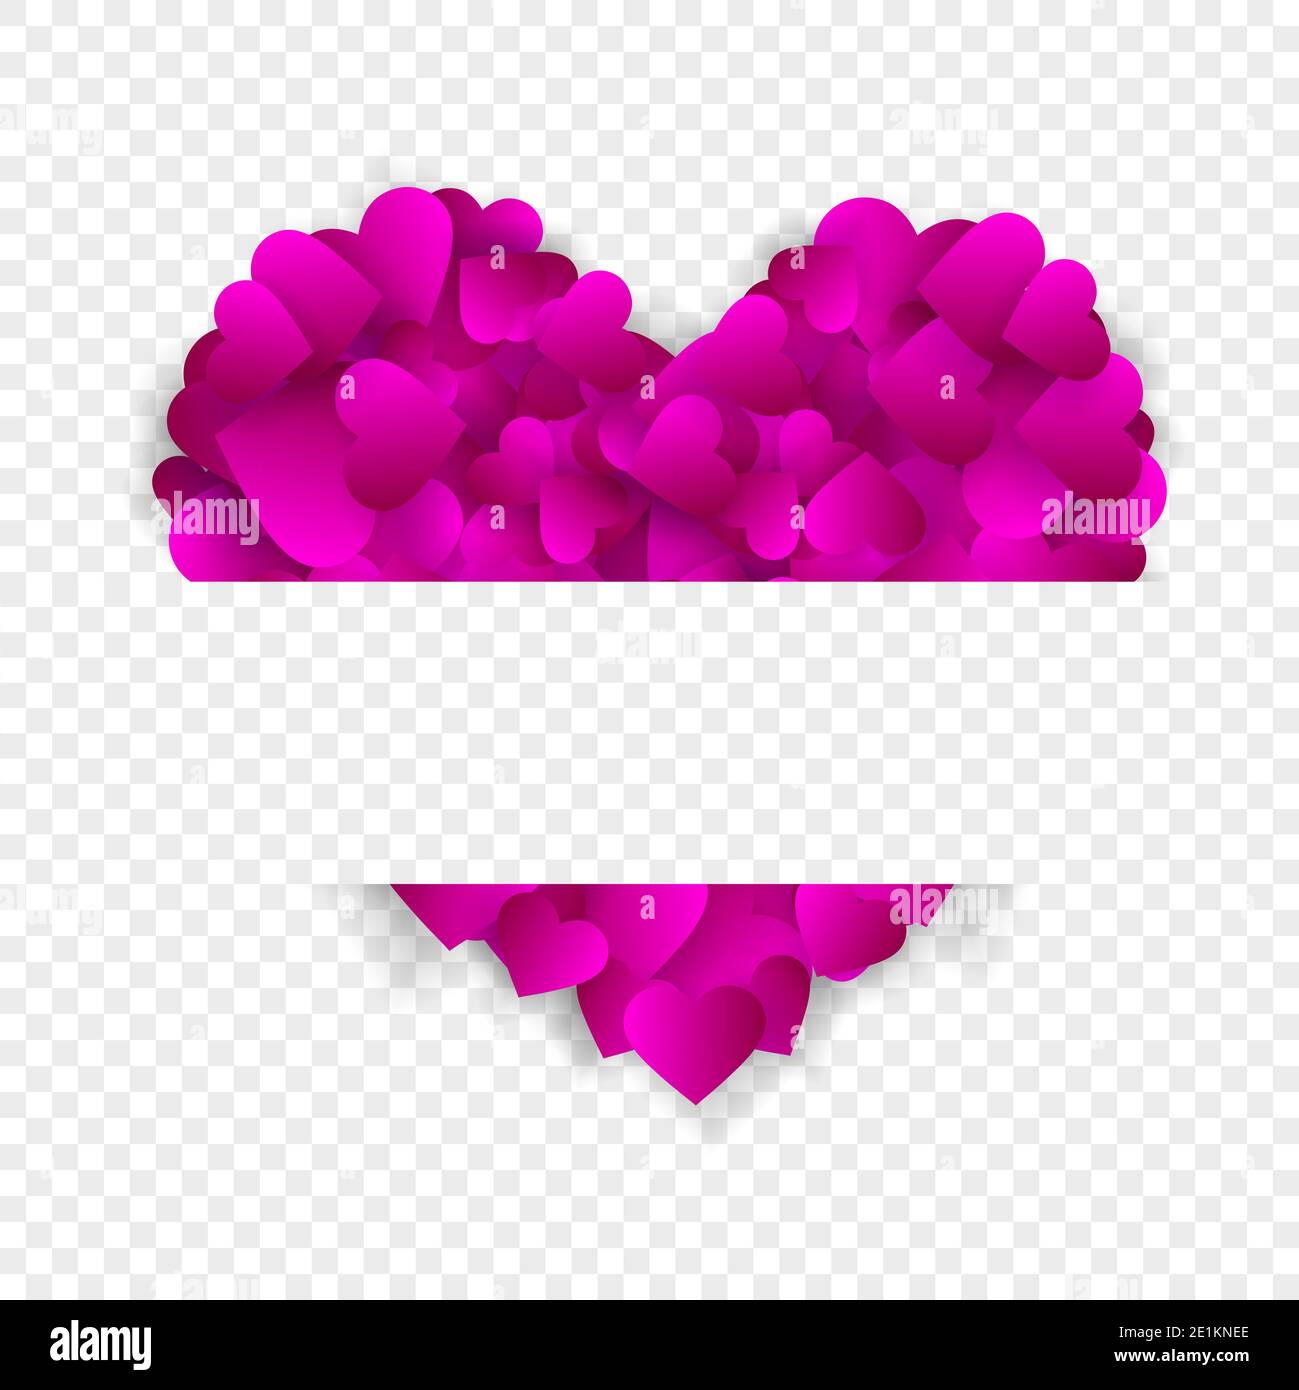 Heart frame vector border love background with big pink heart made of confetti or petals with horizontal copy space isolated on transparent background Stock Photo